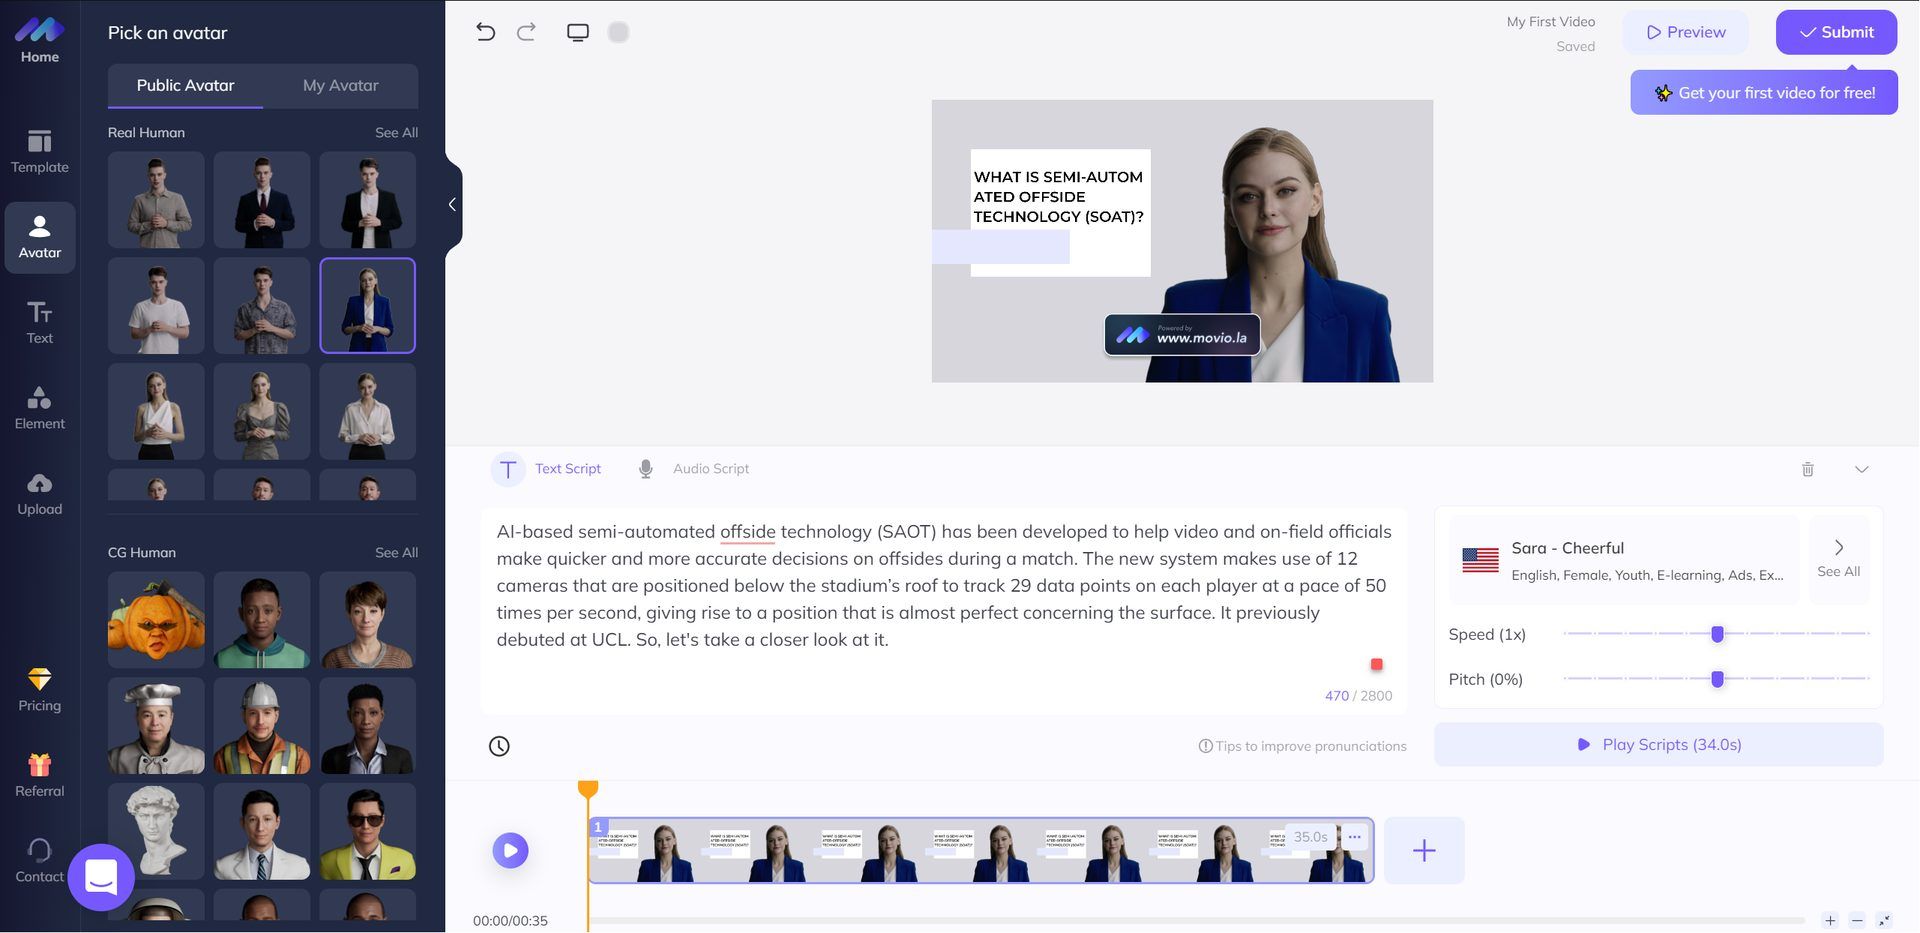 Movio Ai Narrates Your Stories With Lifelike Ai Avatars Capable Of Convincing Lip Sync, Gestures And Expressions